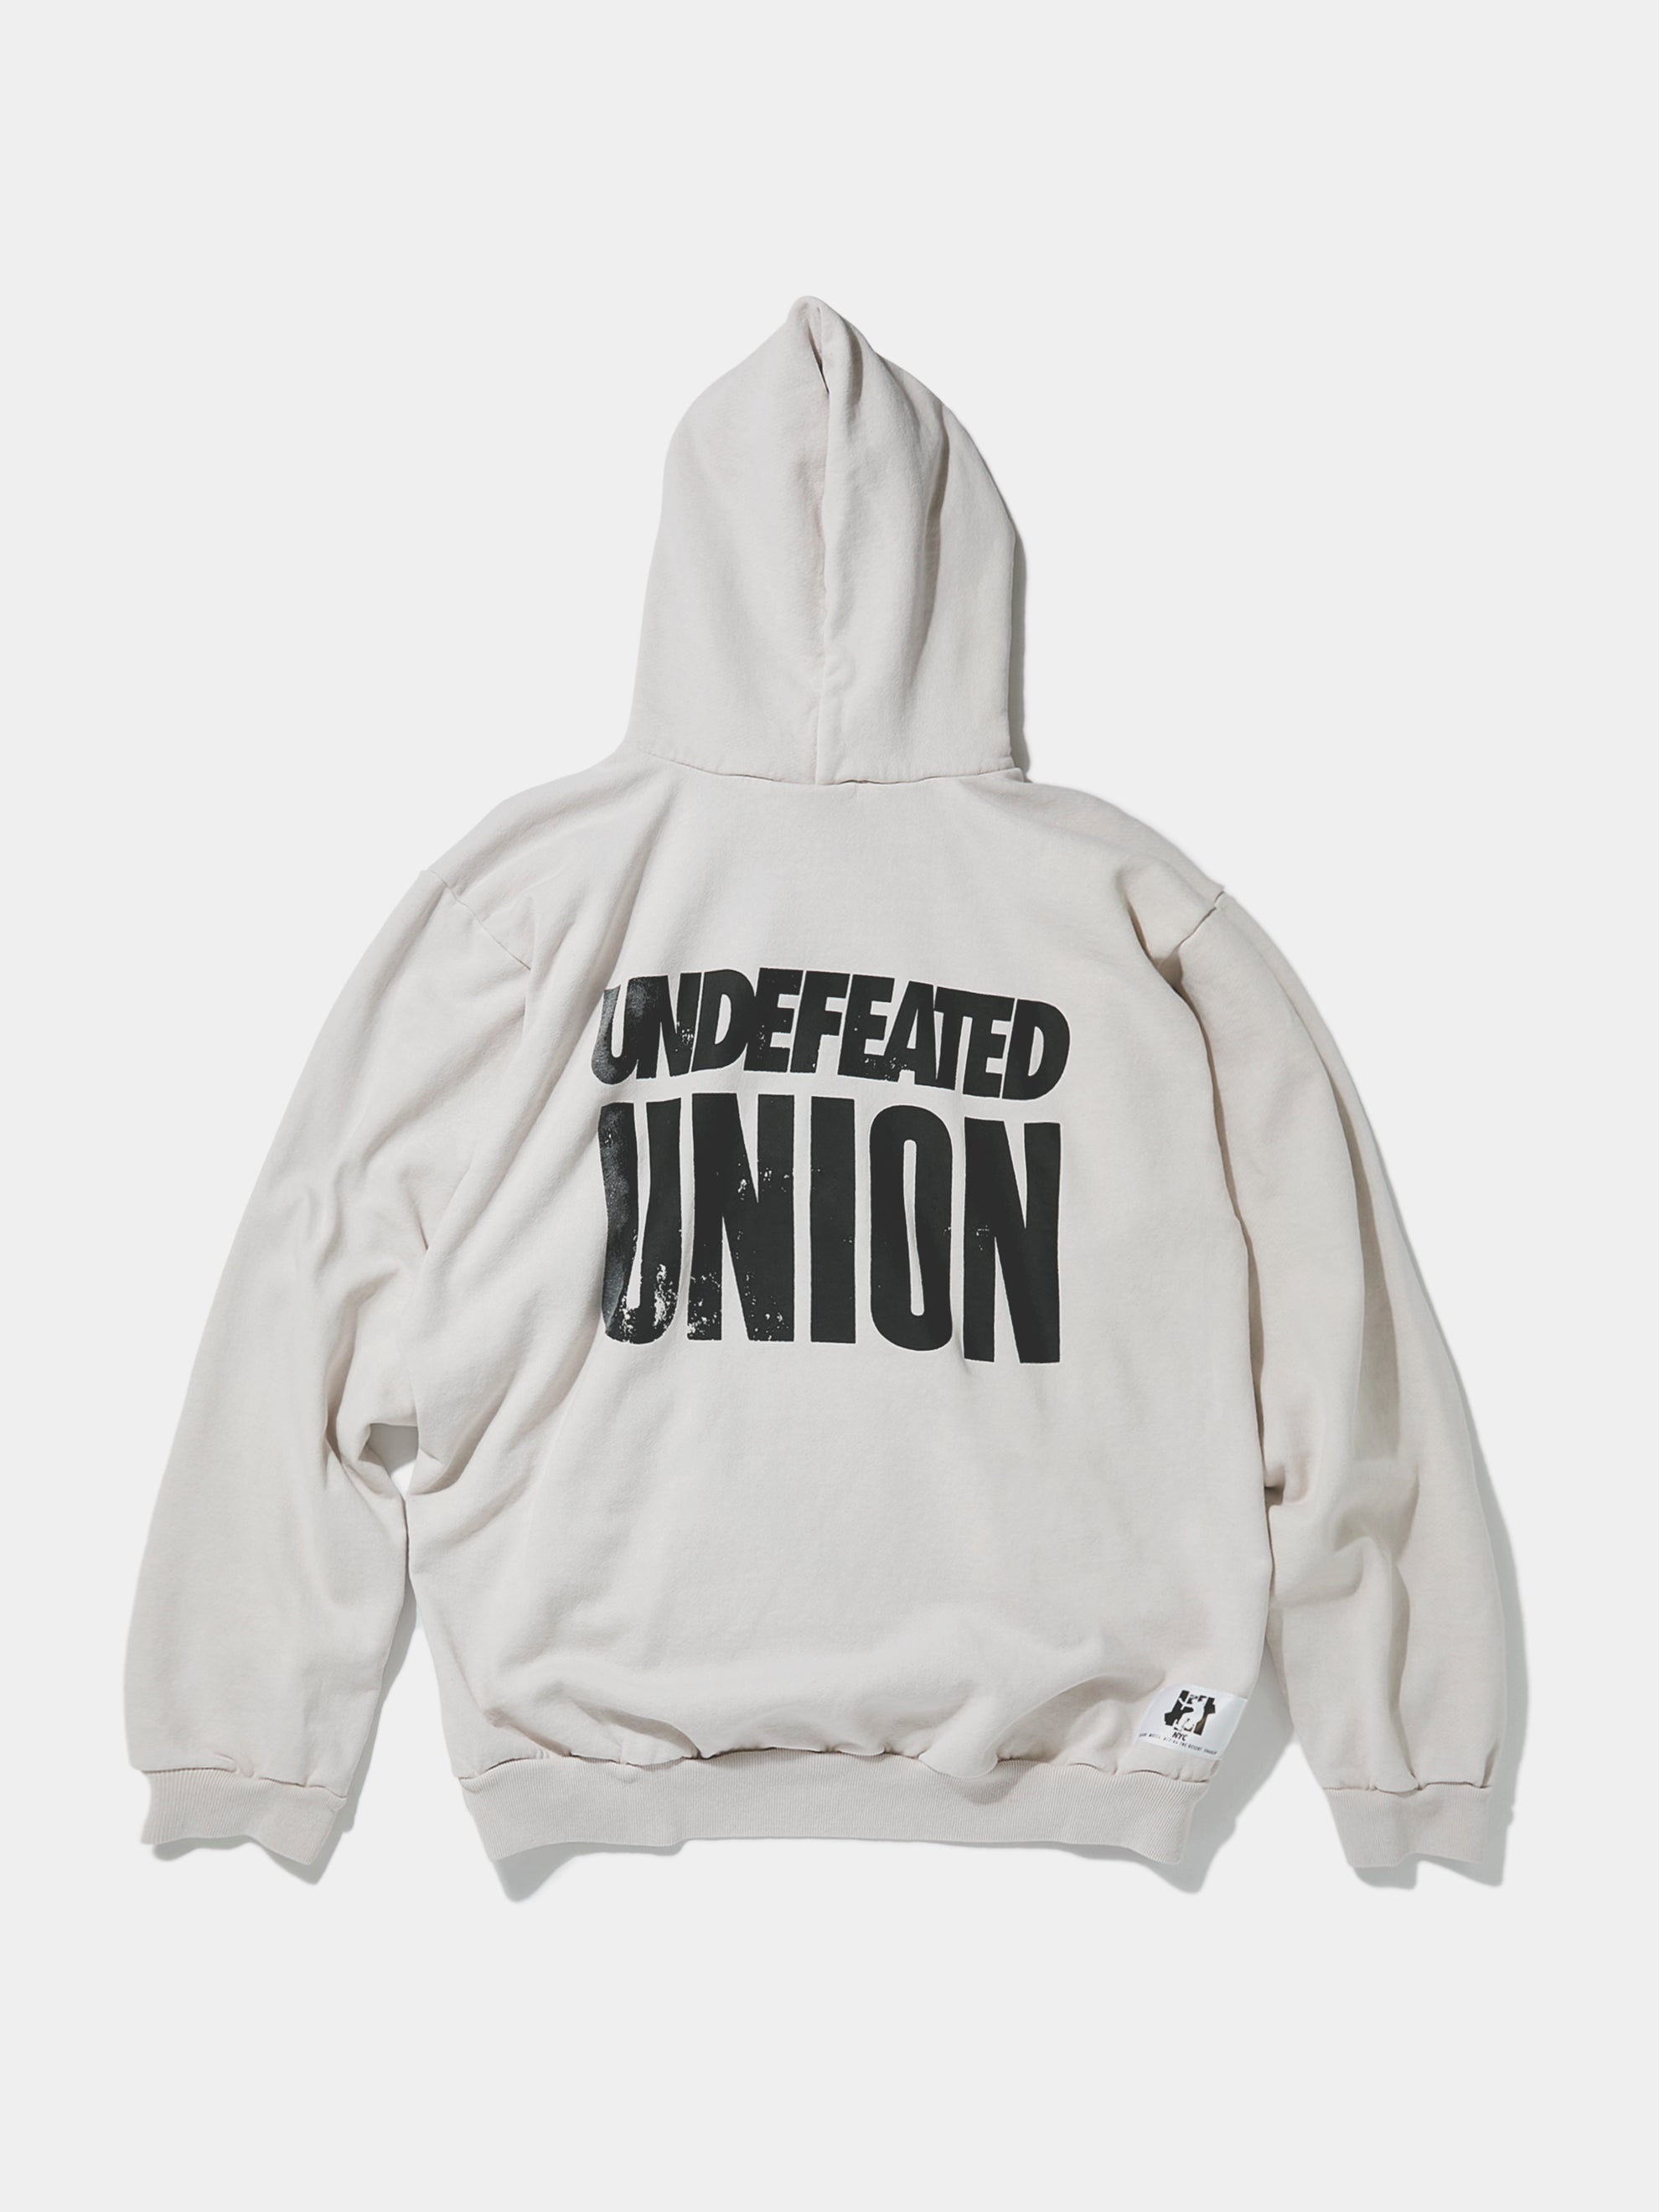 Buy Undefeated UNDEFEATED x UNION Hoodie (Faded Lt. Grey) Online 